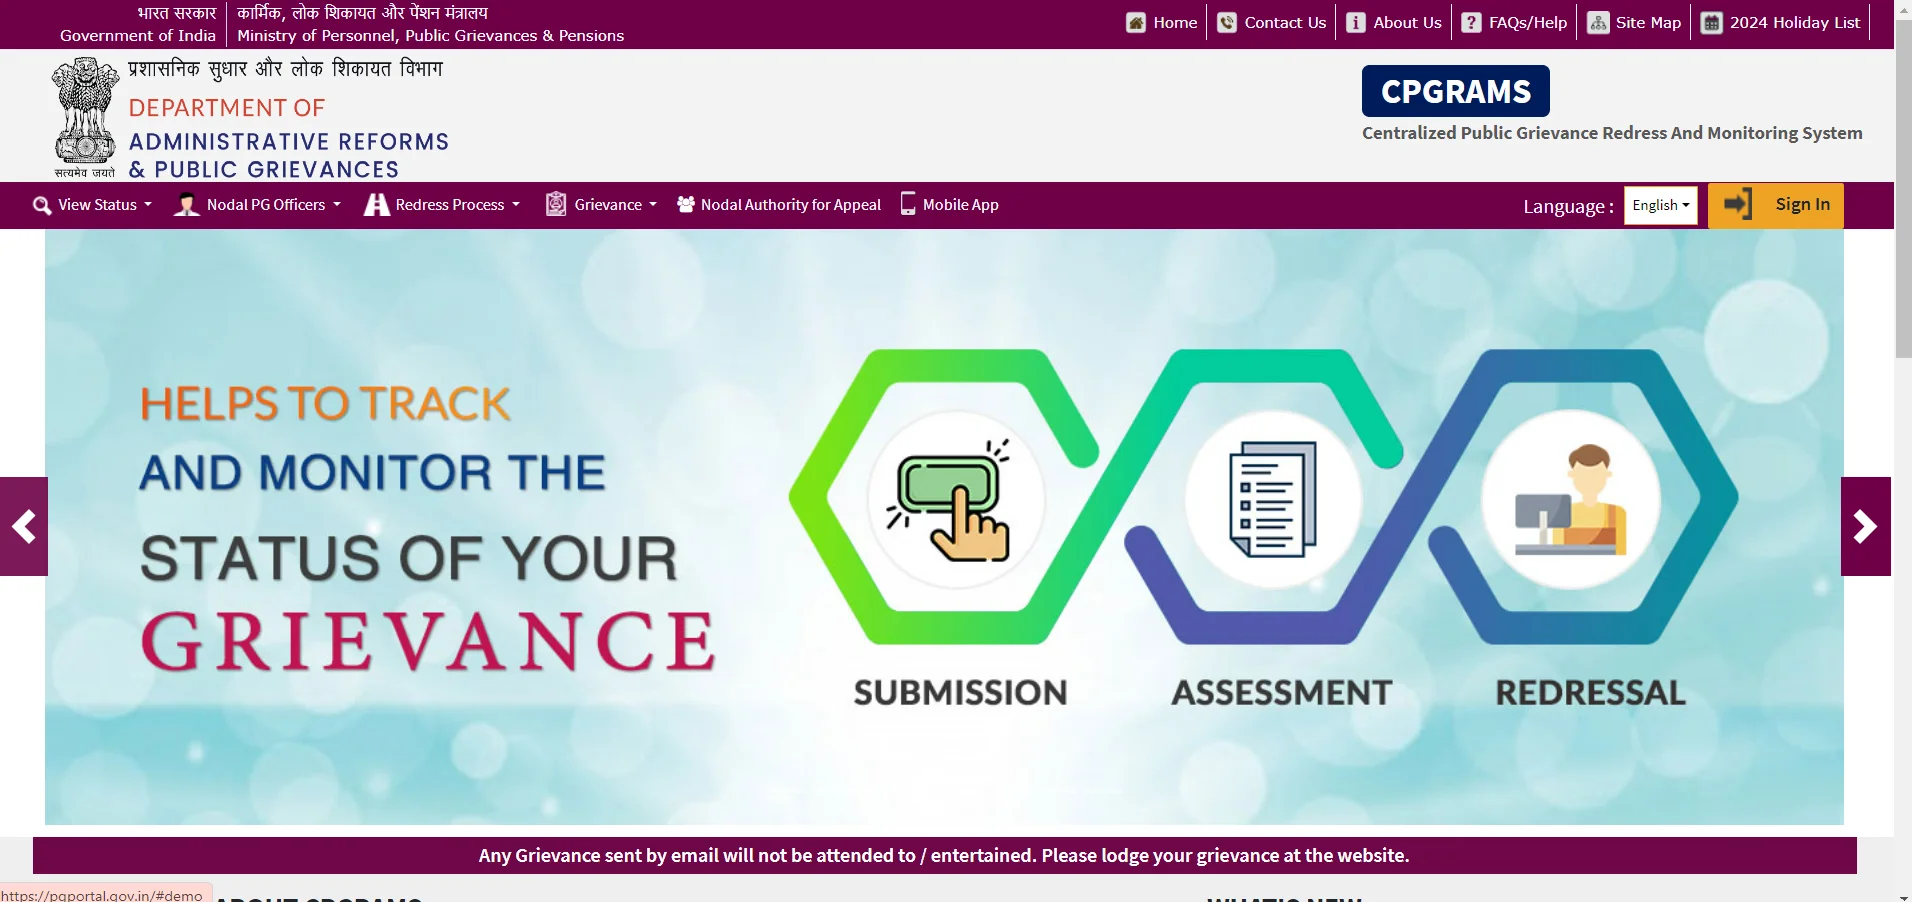 CPGRAMS: A Platform for Public Grievance Redressal